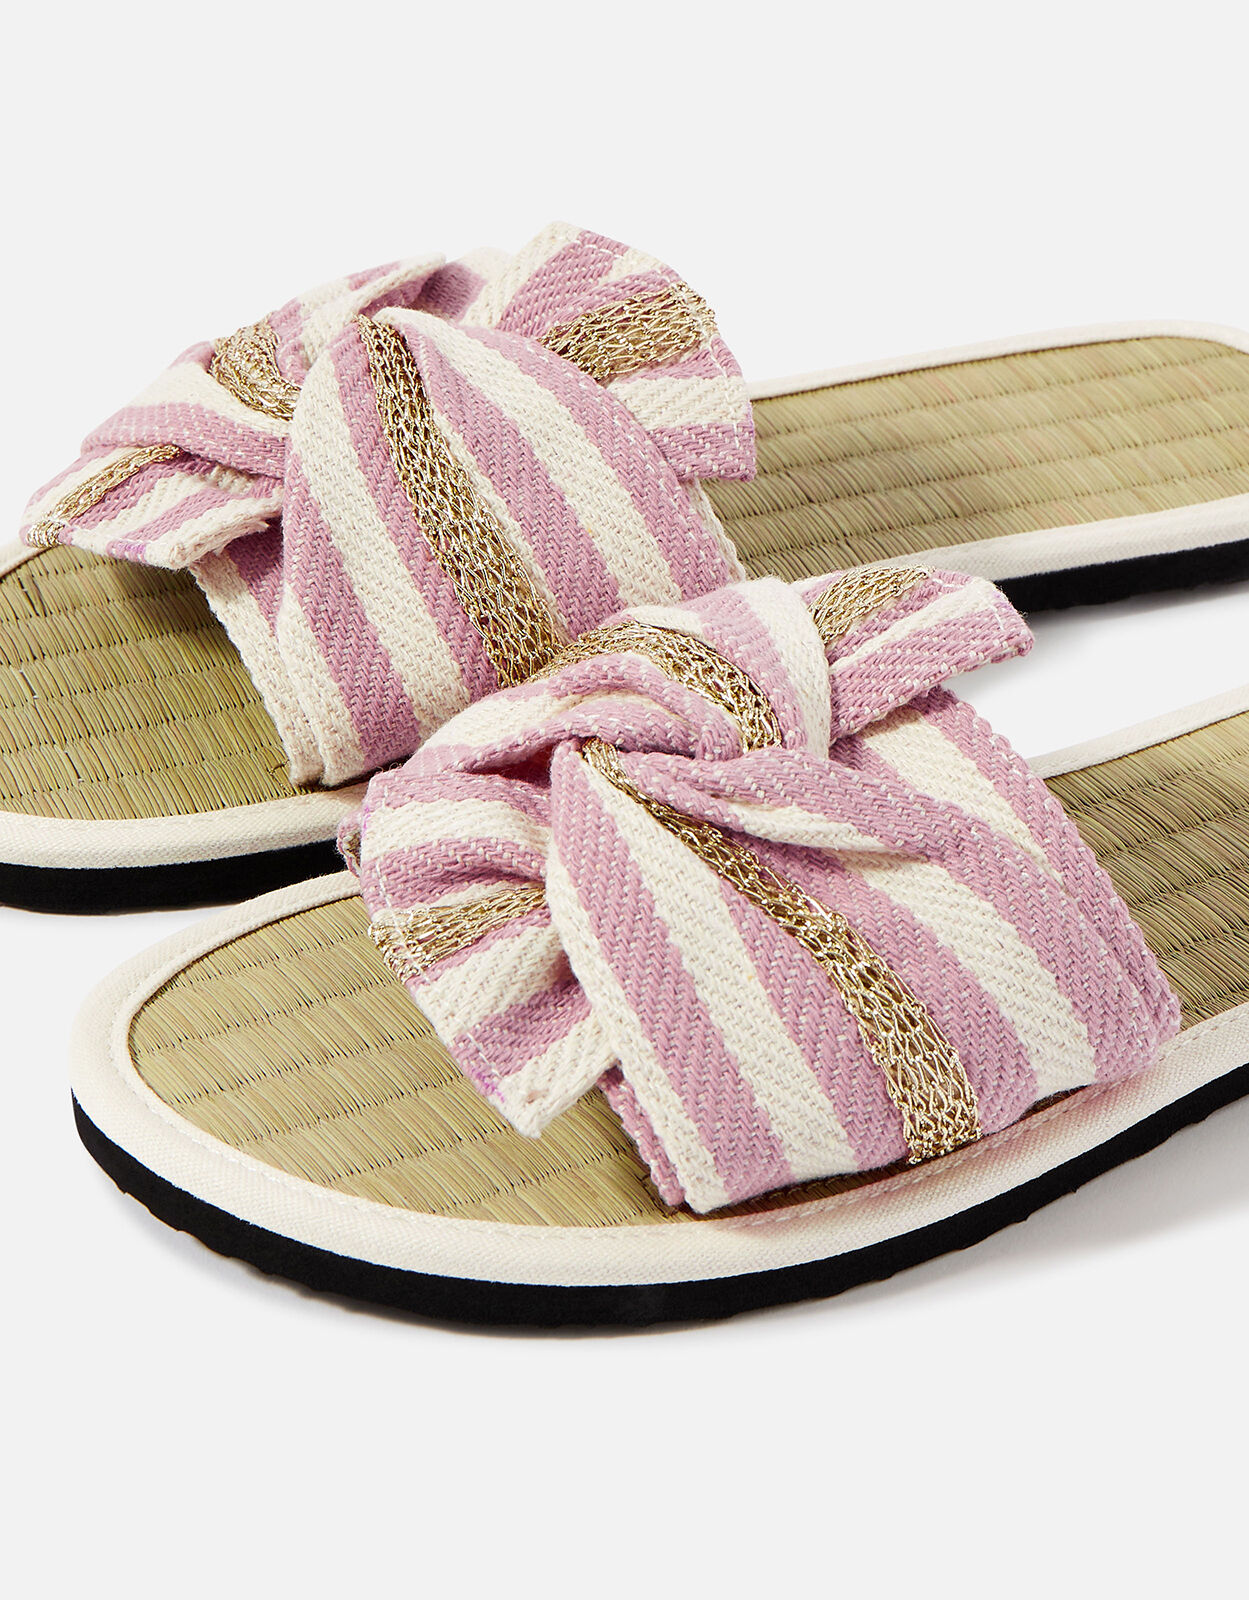 Womens Shoes Flats and flat shoes Flat sandals Accessorize Ladies Pink And White Stripe Cotton Perth Seagrass Sliders 